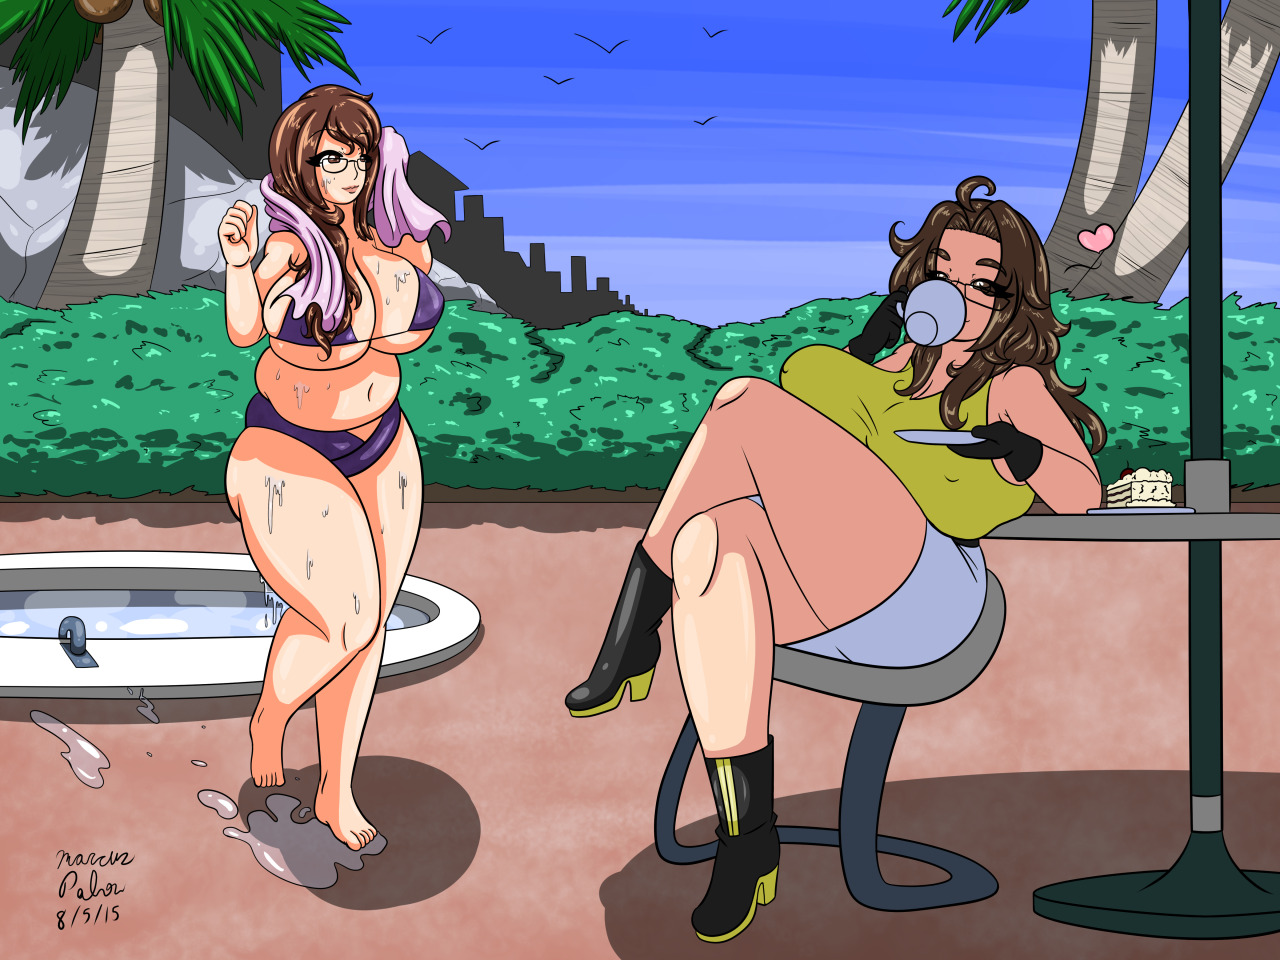 ragawa:  anubis2pabon288:  Here’s a gift for Agawa, featuring his gals Jyazue and